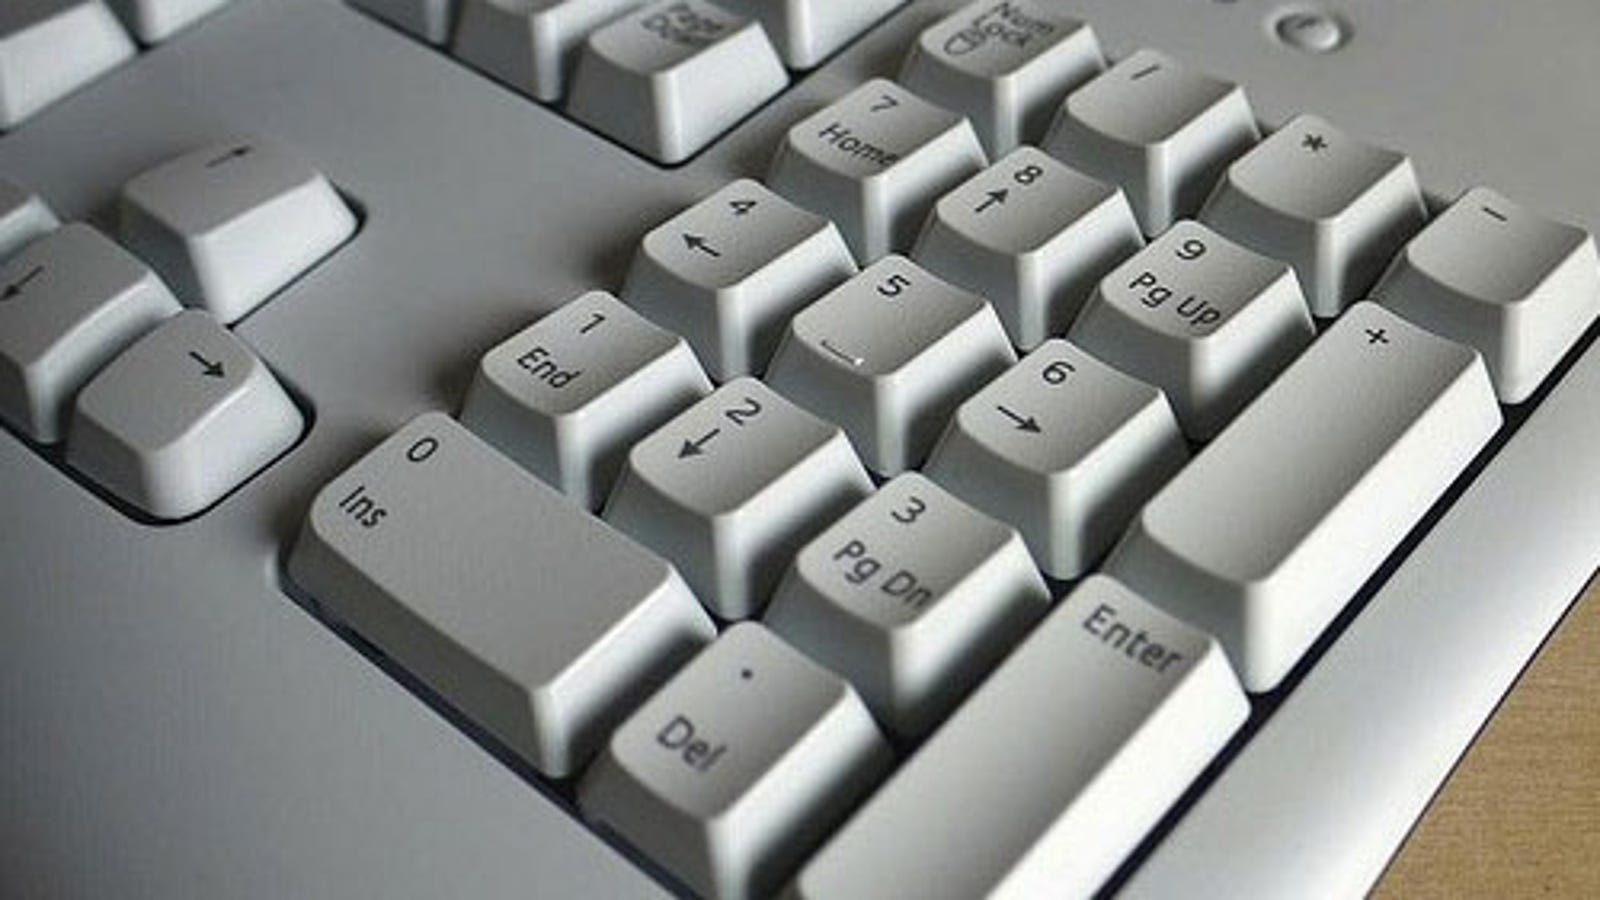 TypeOnline Offers Free Lessons to Improve Your Number Pad Typing